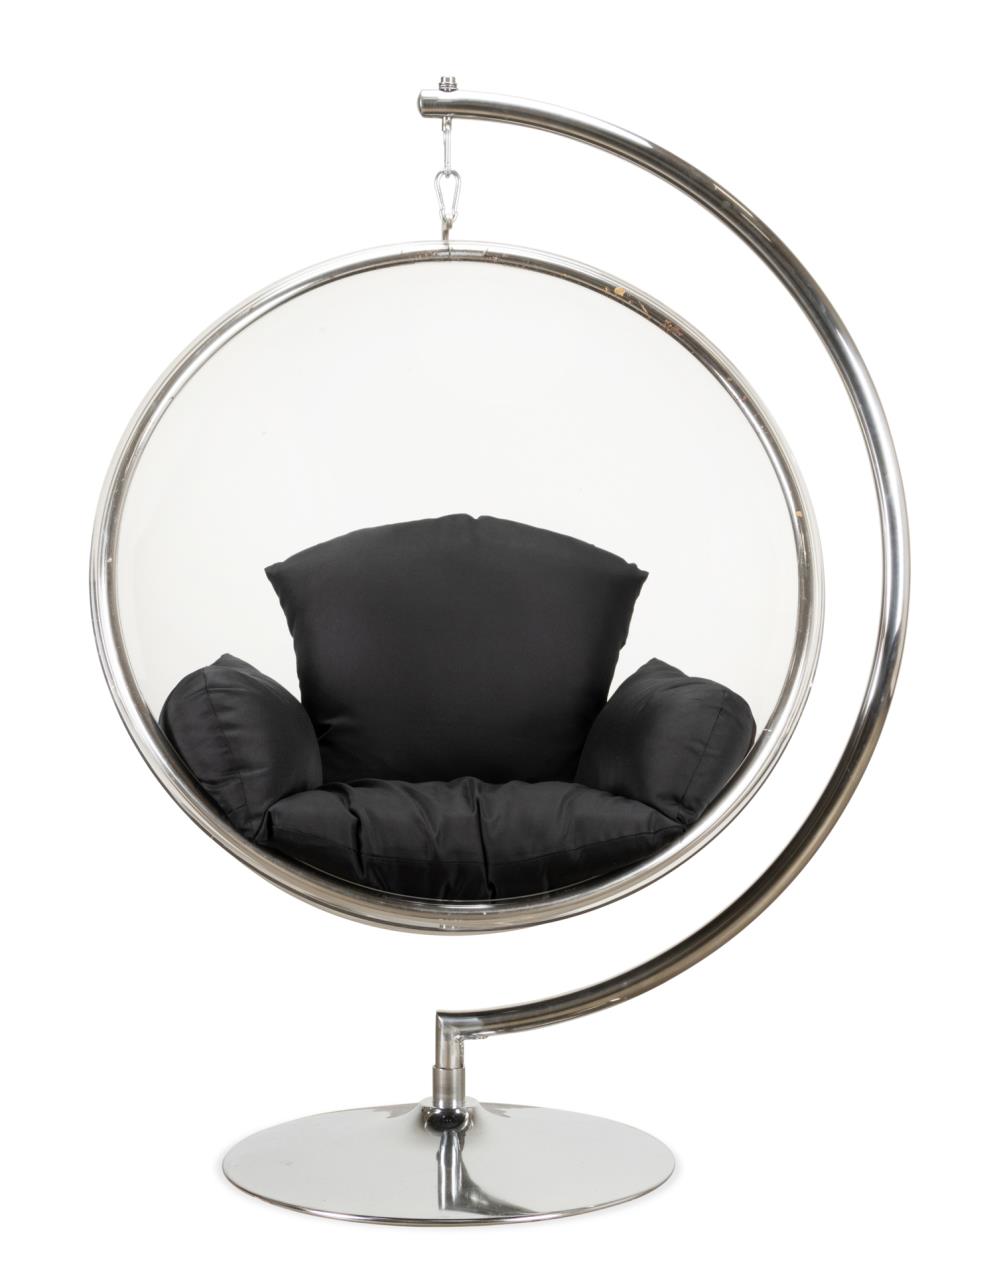 HANGING CLEAR ACRYLIC BUBBLE CHAIR